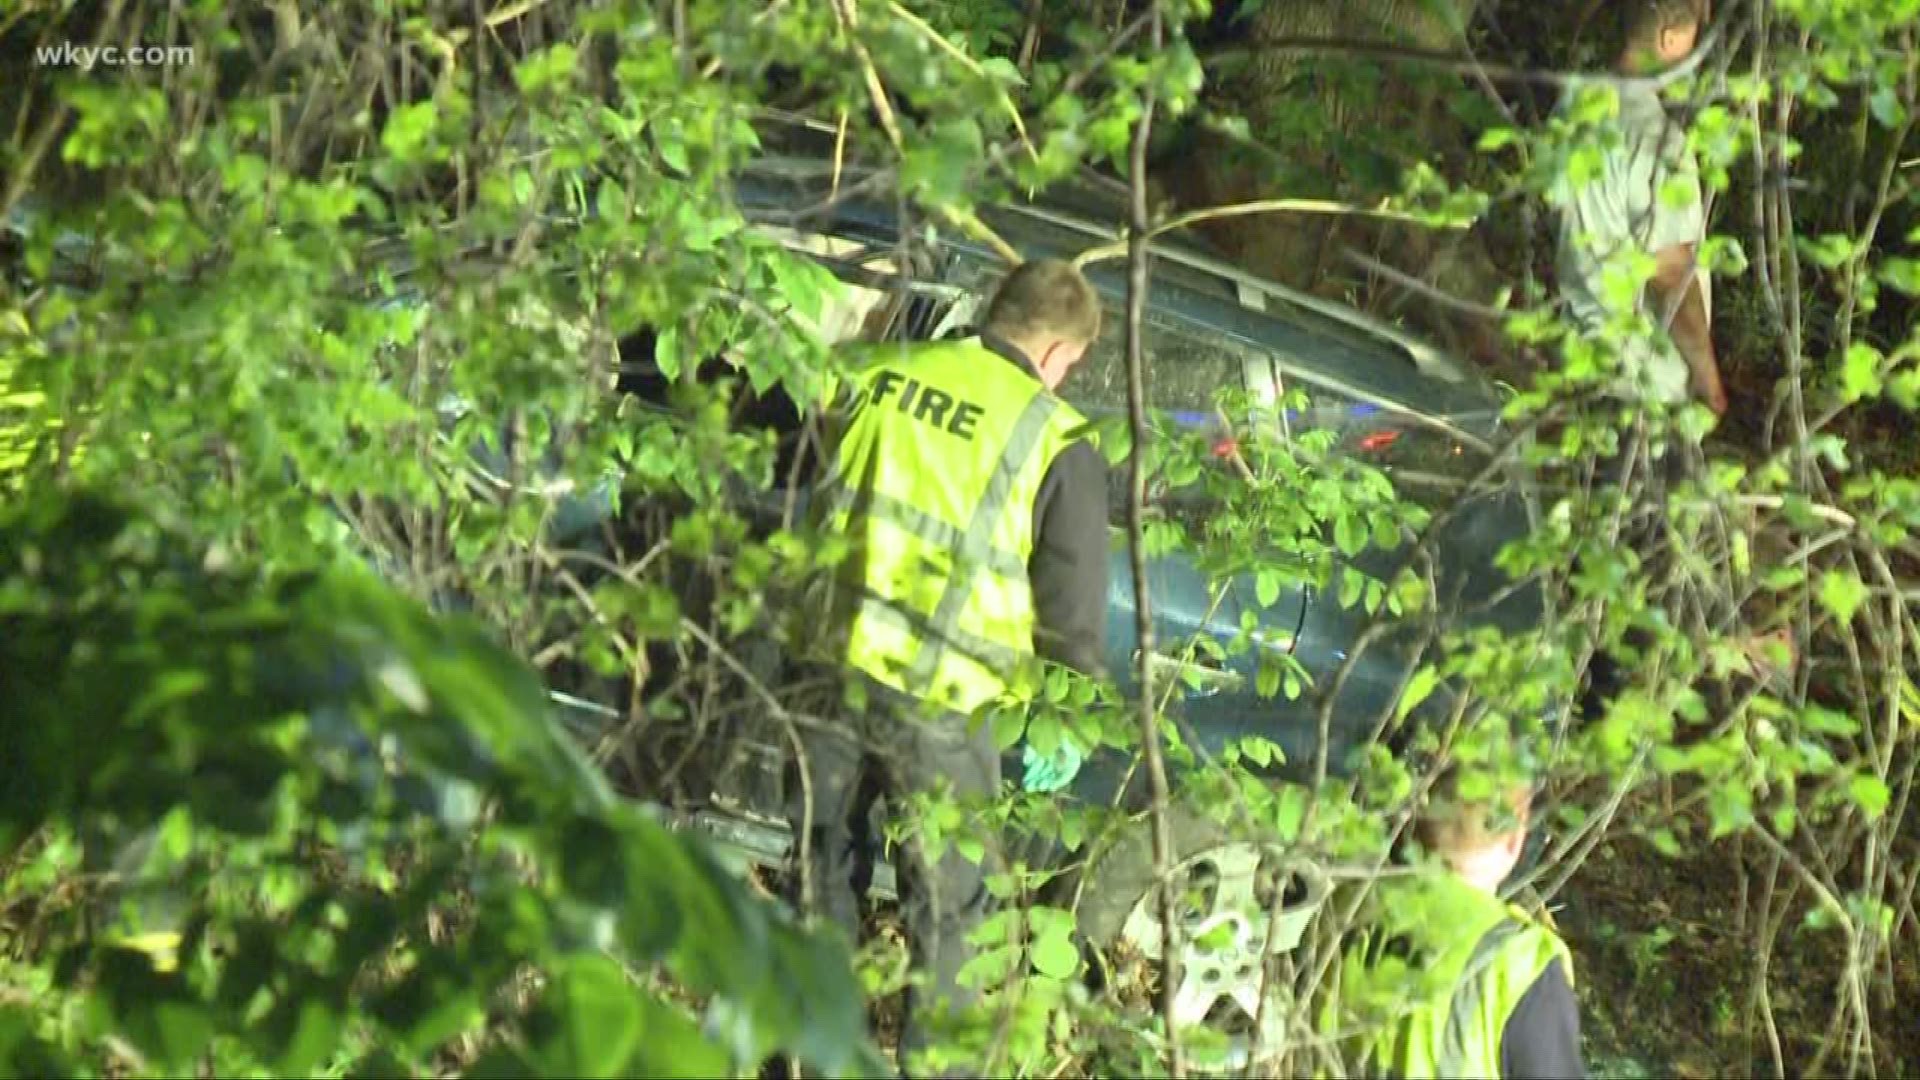 May 24, 2019: Three people were taken to the hospital following an early morning accident in which a pedestrian was struck in Cleveland. It happened shortly after midnight Friday when an SUV without its headlights on hit a woman on the sidewalk along St. Clair. The SUV then went down an embankment near MLK Drive.